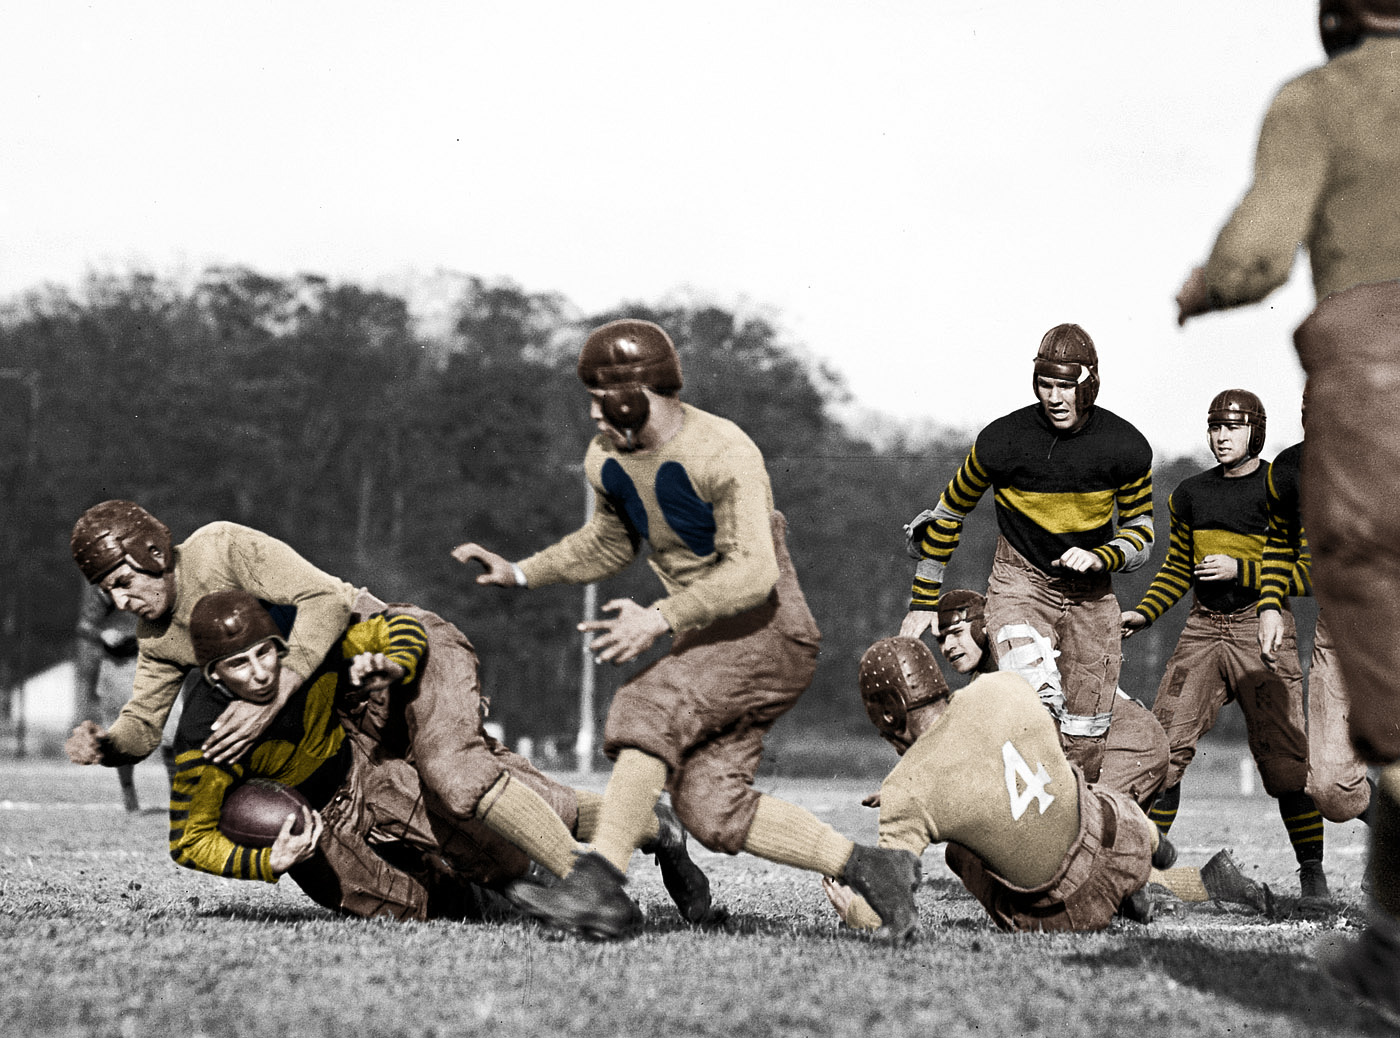 Colorized version of "Old-School: 1923." I could not find any information as to which team wore which uniforms or what the colors were back then so I took the modern colors for each school and assigned them as I saw fit.

Randolph-Macon currently has Lemon Gold and Black so I assigned those colors to the team with the dark jerseys with the stripes.

Gallaudet has Blue and Buff which I assigned to the team with the light jerseys and the dark chest panels. View full size.